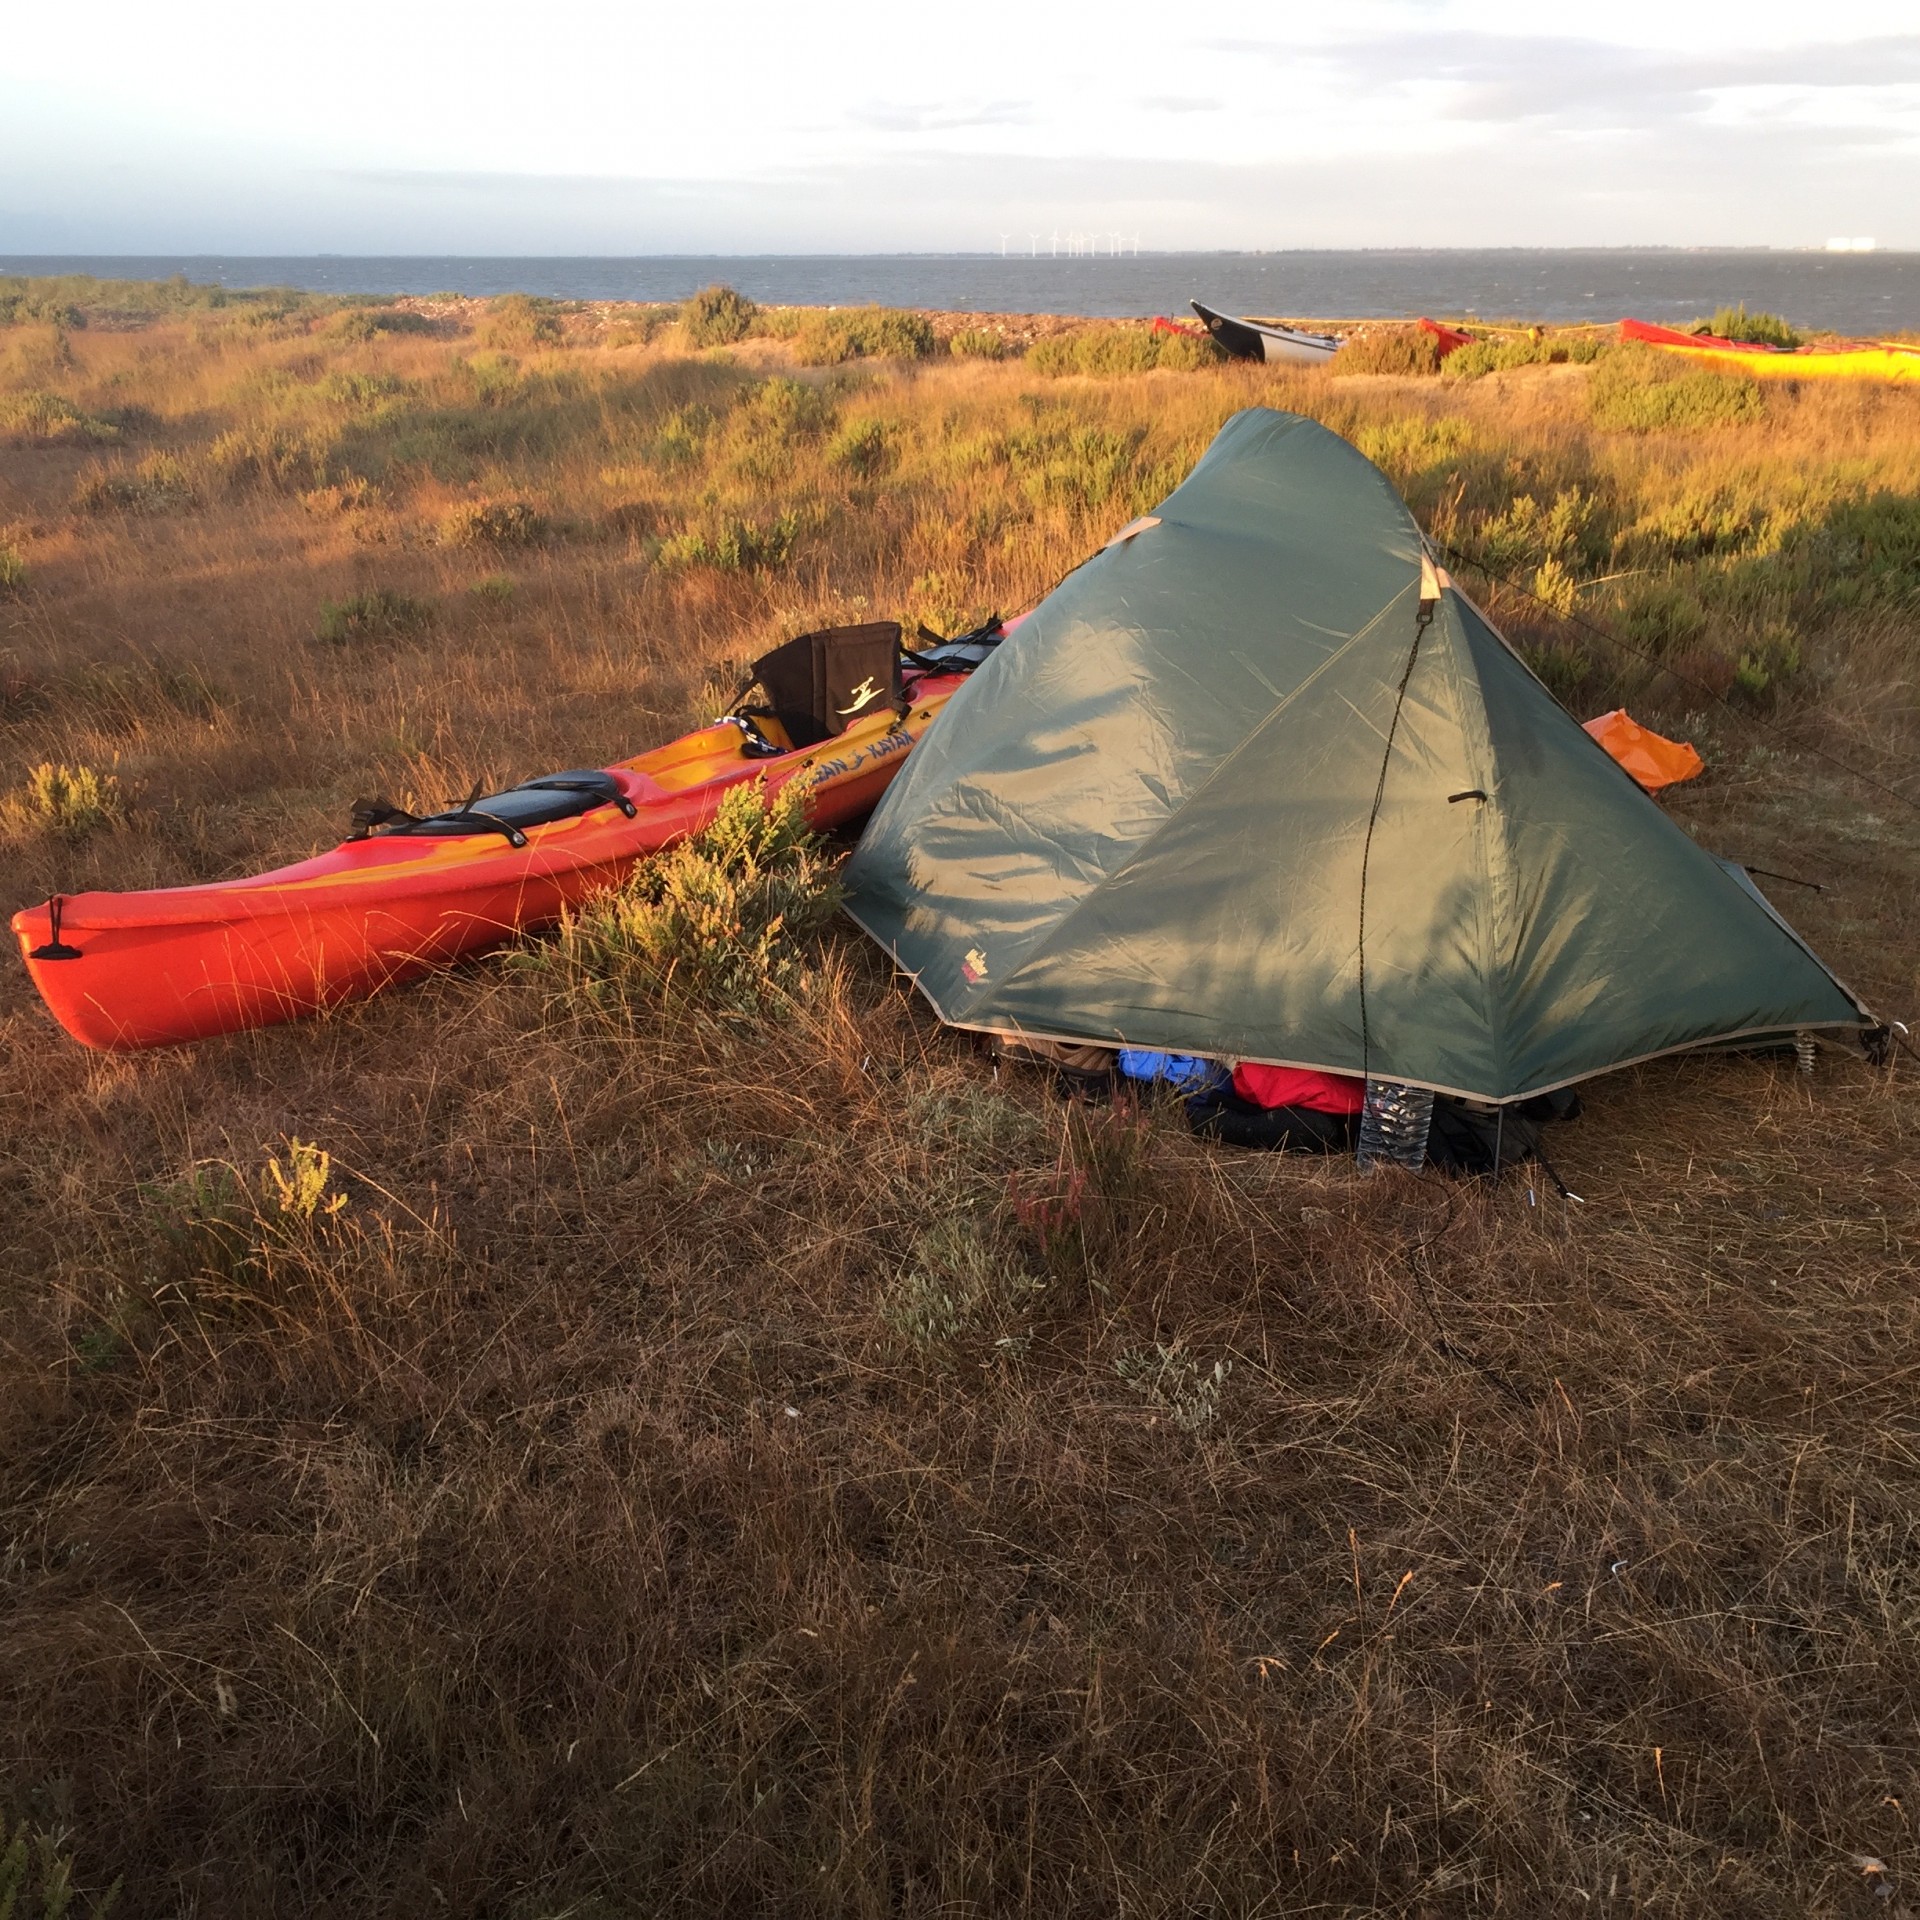 Sea kayak and tent on the beach wild camping.